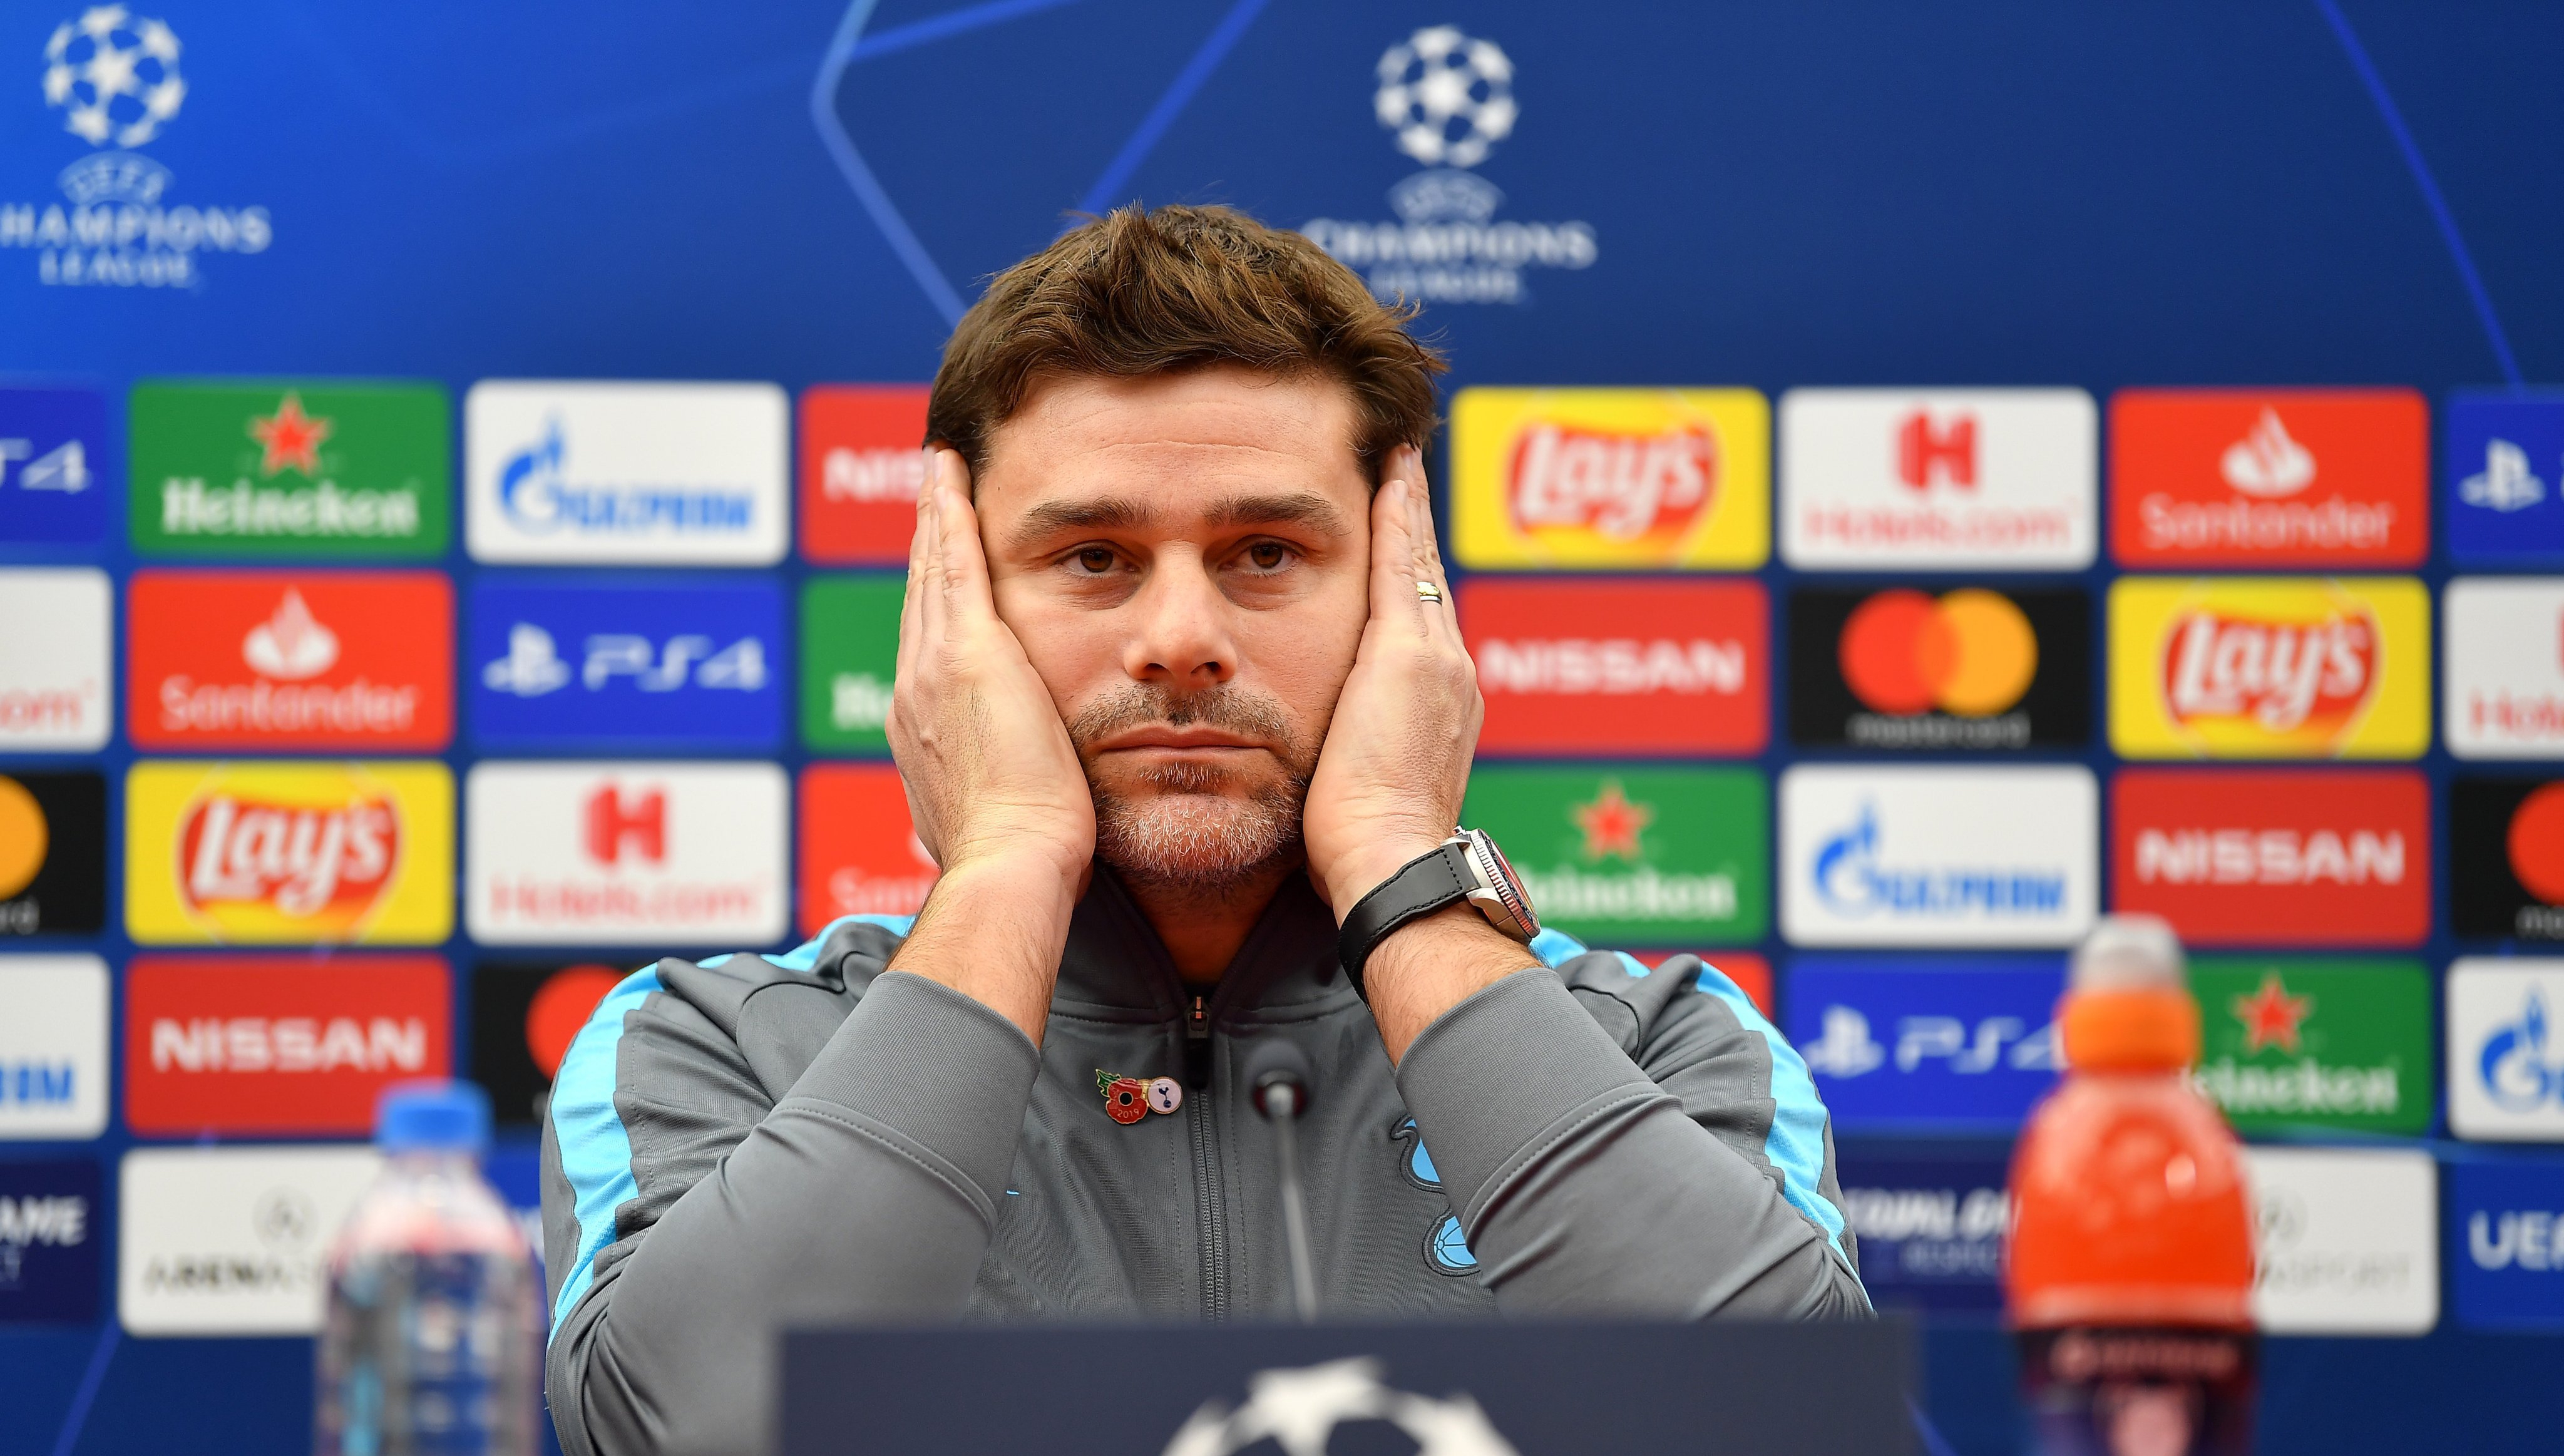 Pochettino breaks silence on Tottenham sack after being replaced by Jose Mourinho